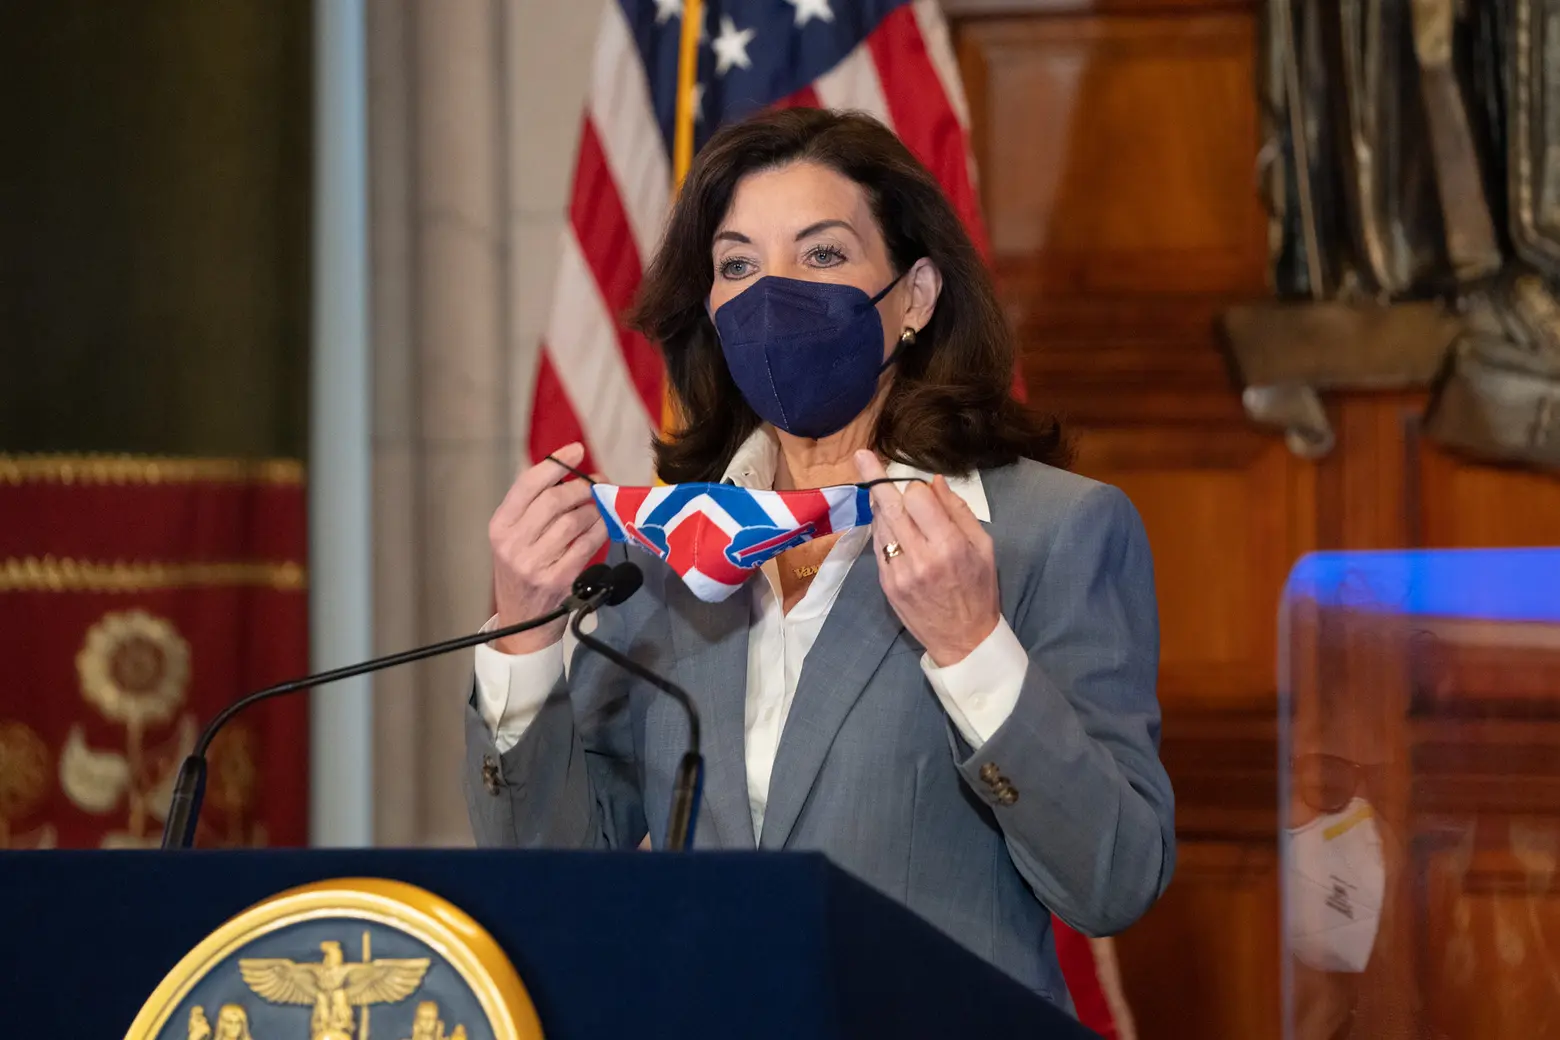 New York’s mask mandate is reinstated, for now